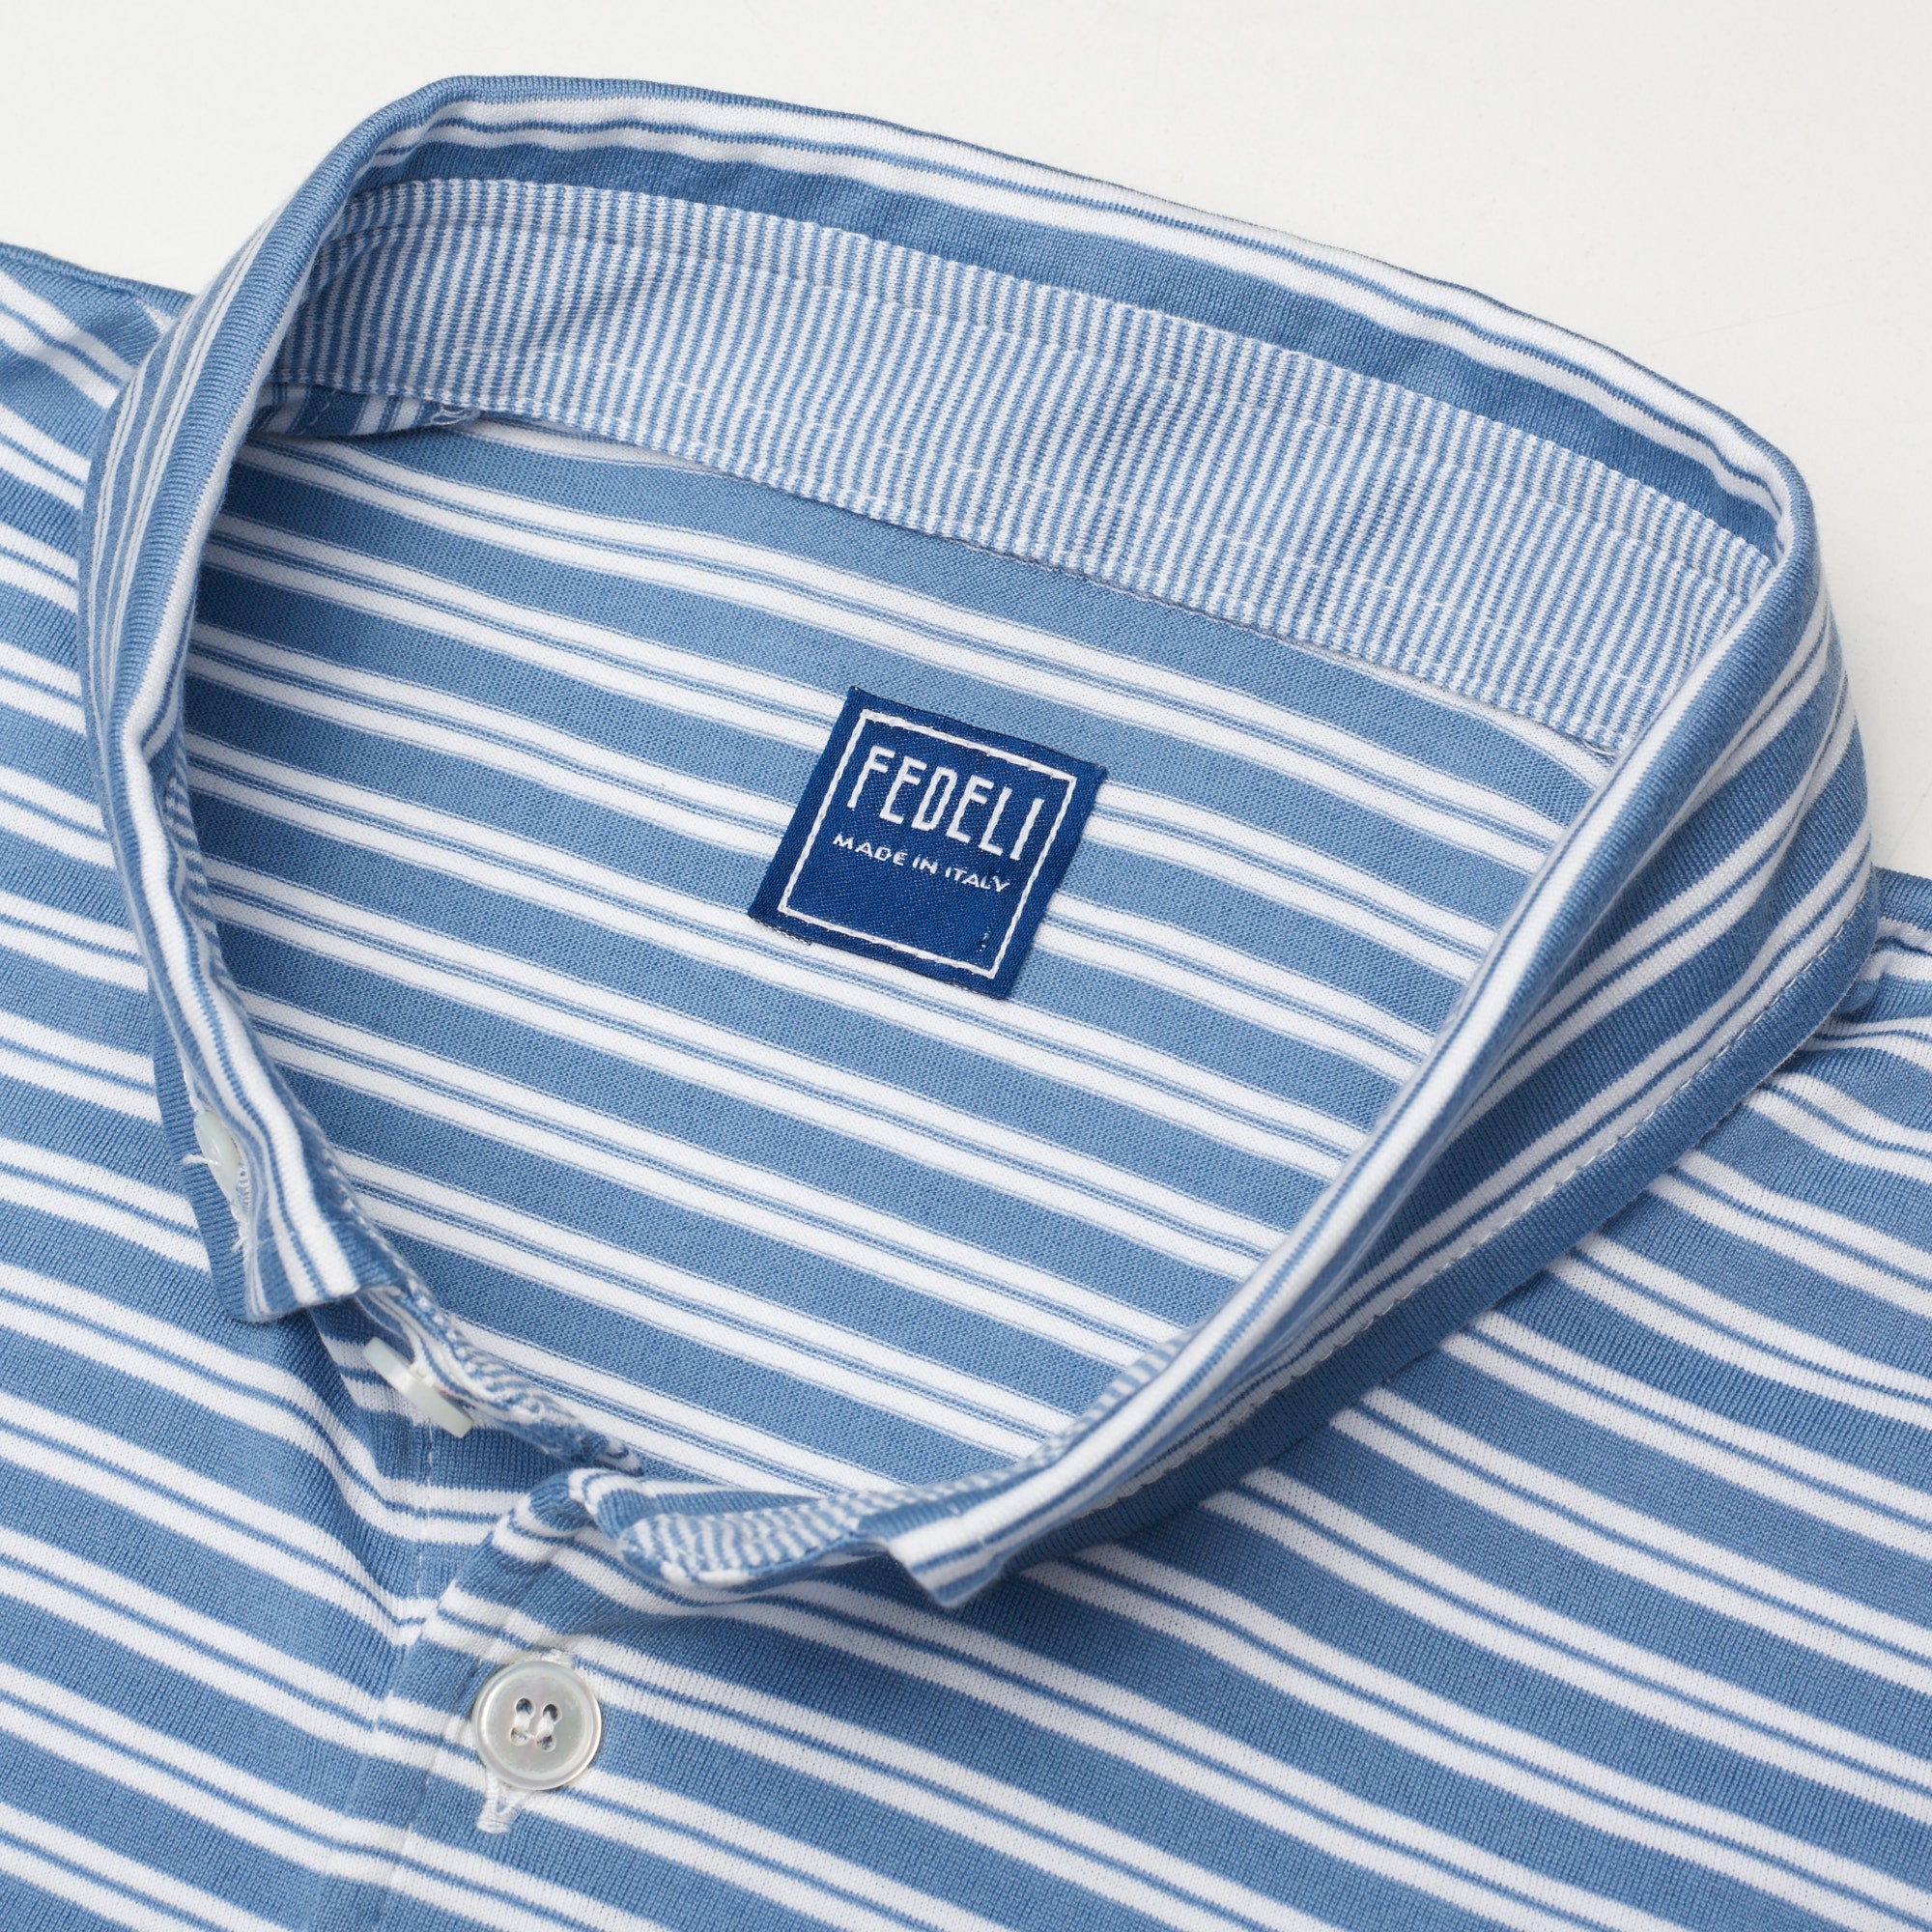 FEDELI "Editing" Blue Striped Jersey Cotton Short Sleeve Button-Down Polo Shirt 52 NEW L FEDELI